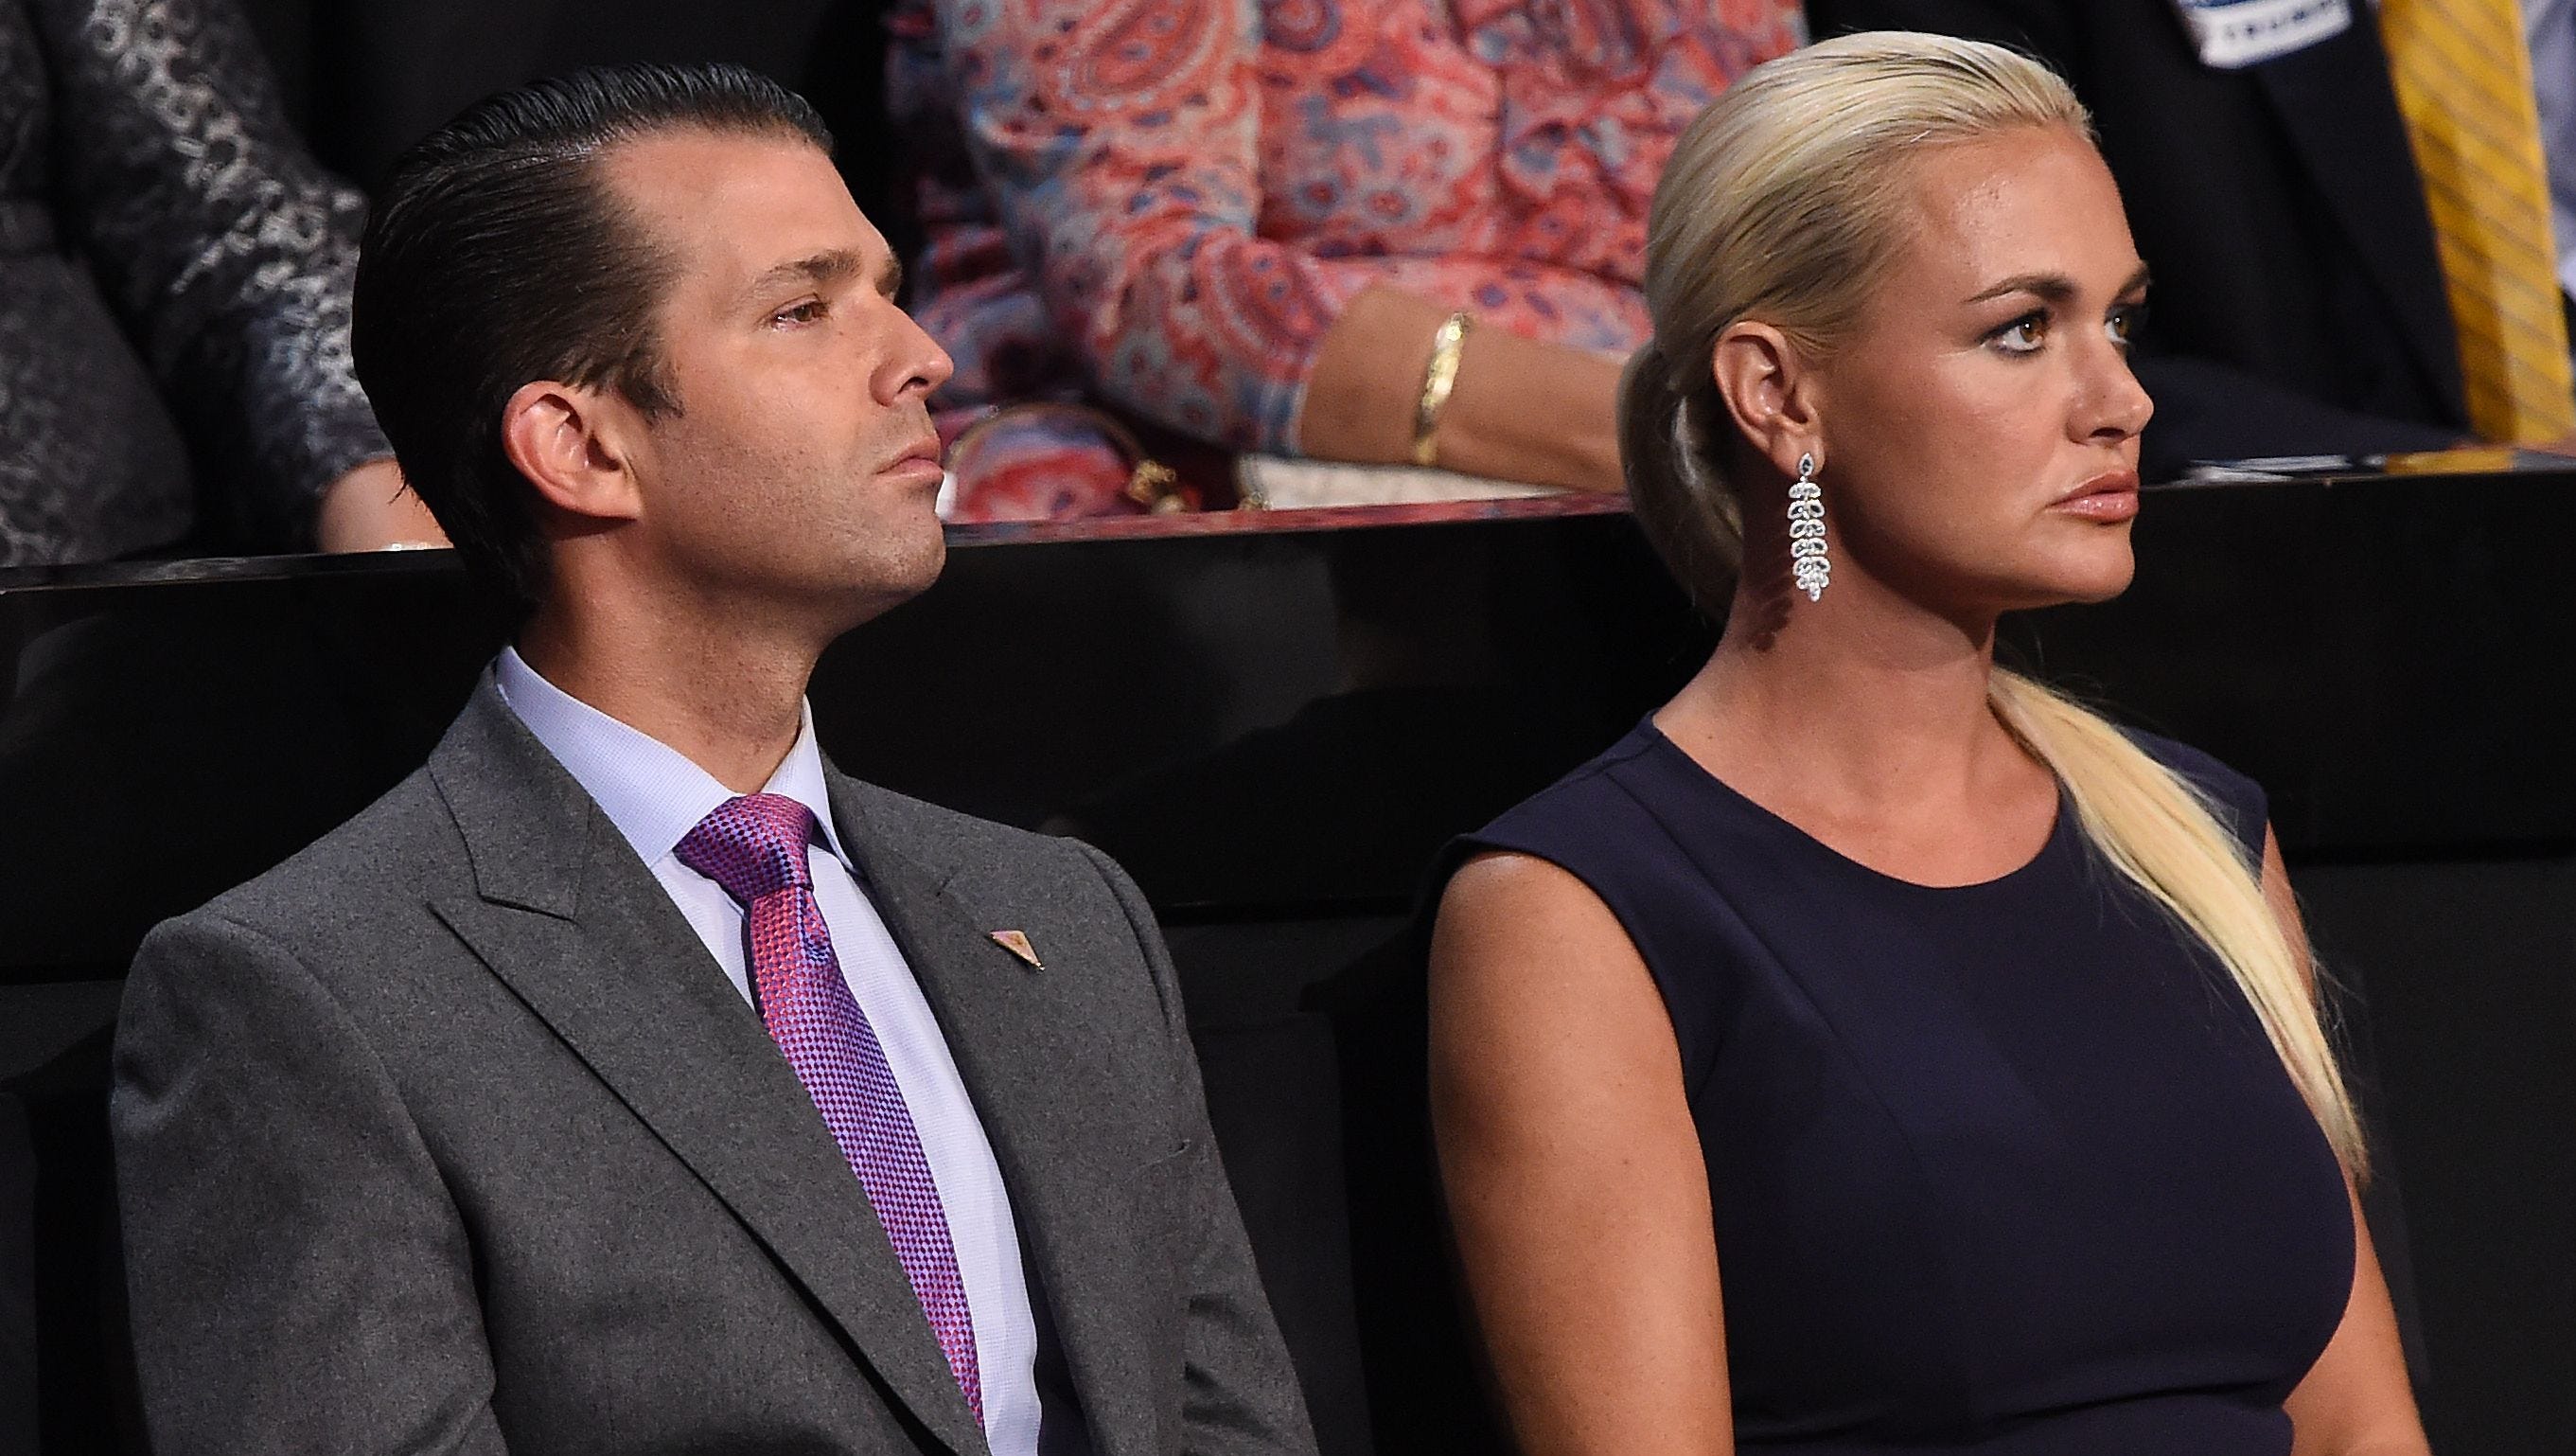 Donald Trump Jr.s wife files for divorce after 12 years of marriage